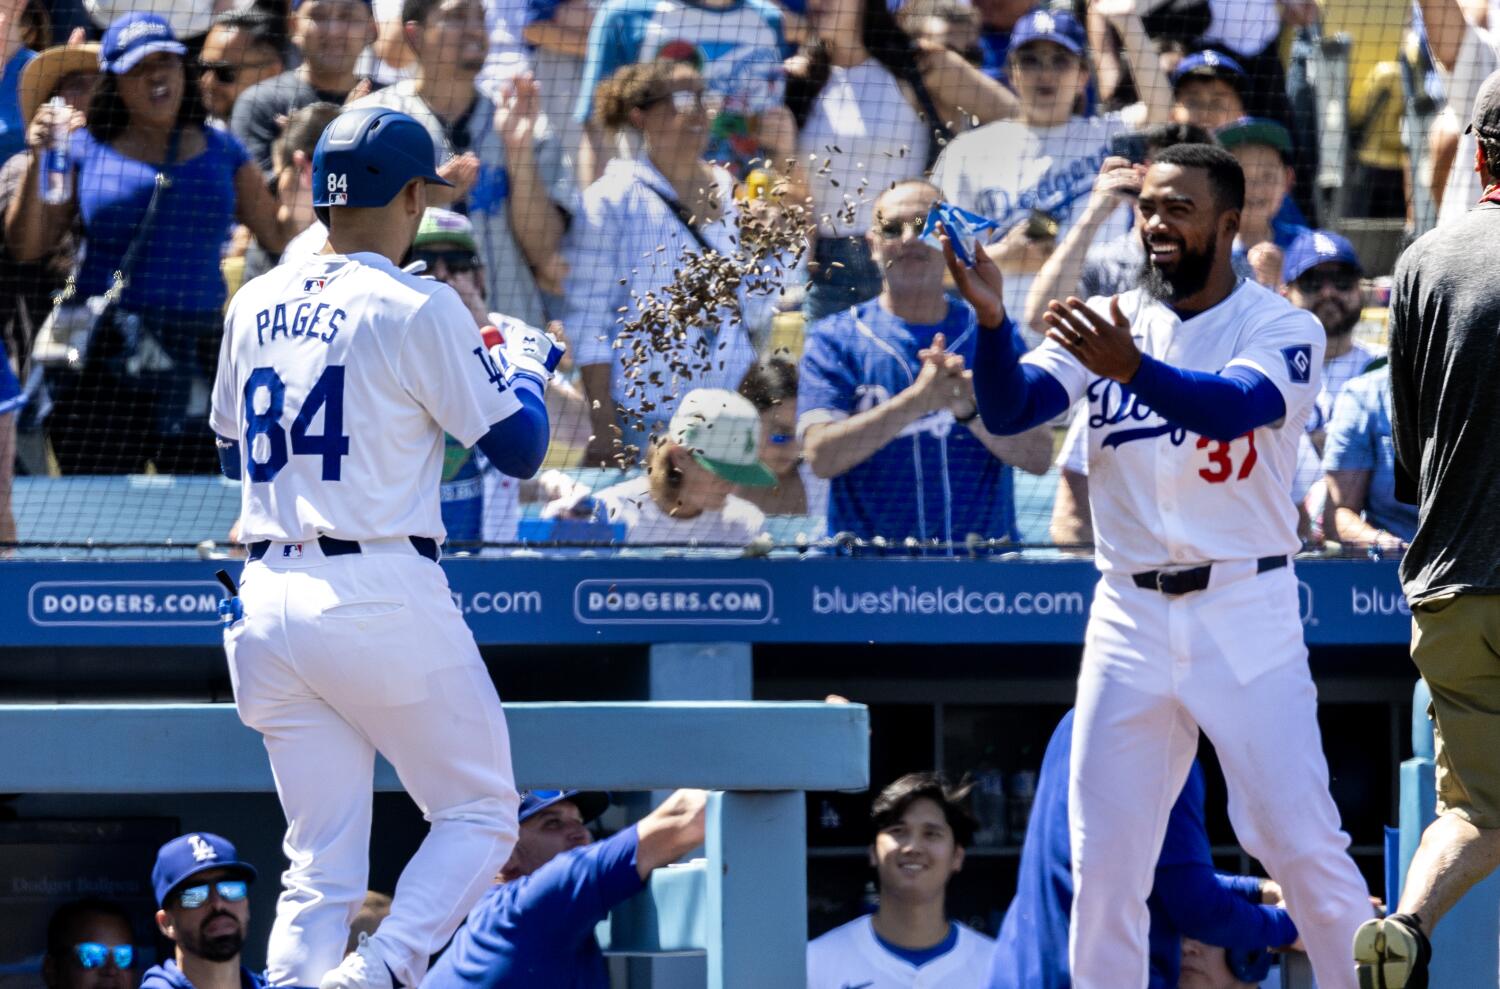 Shell yes: Teoscar Hernández is the Dodgers' always-smiling, seed-throwing motivator